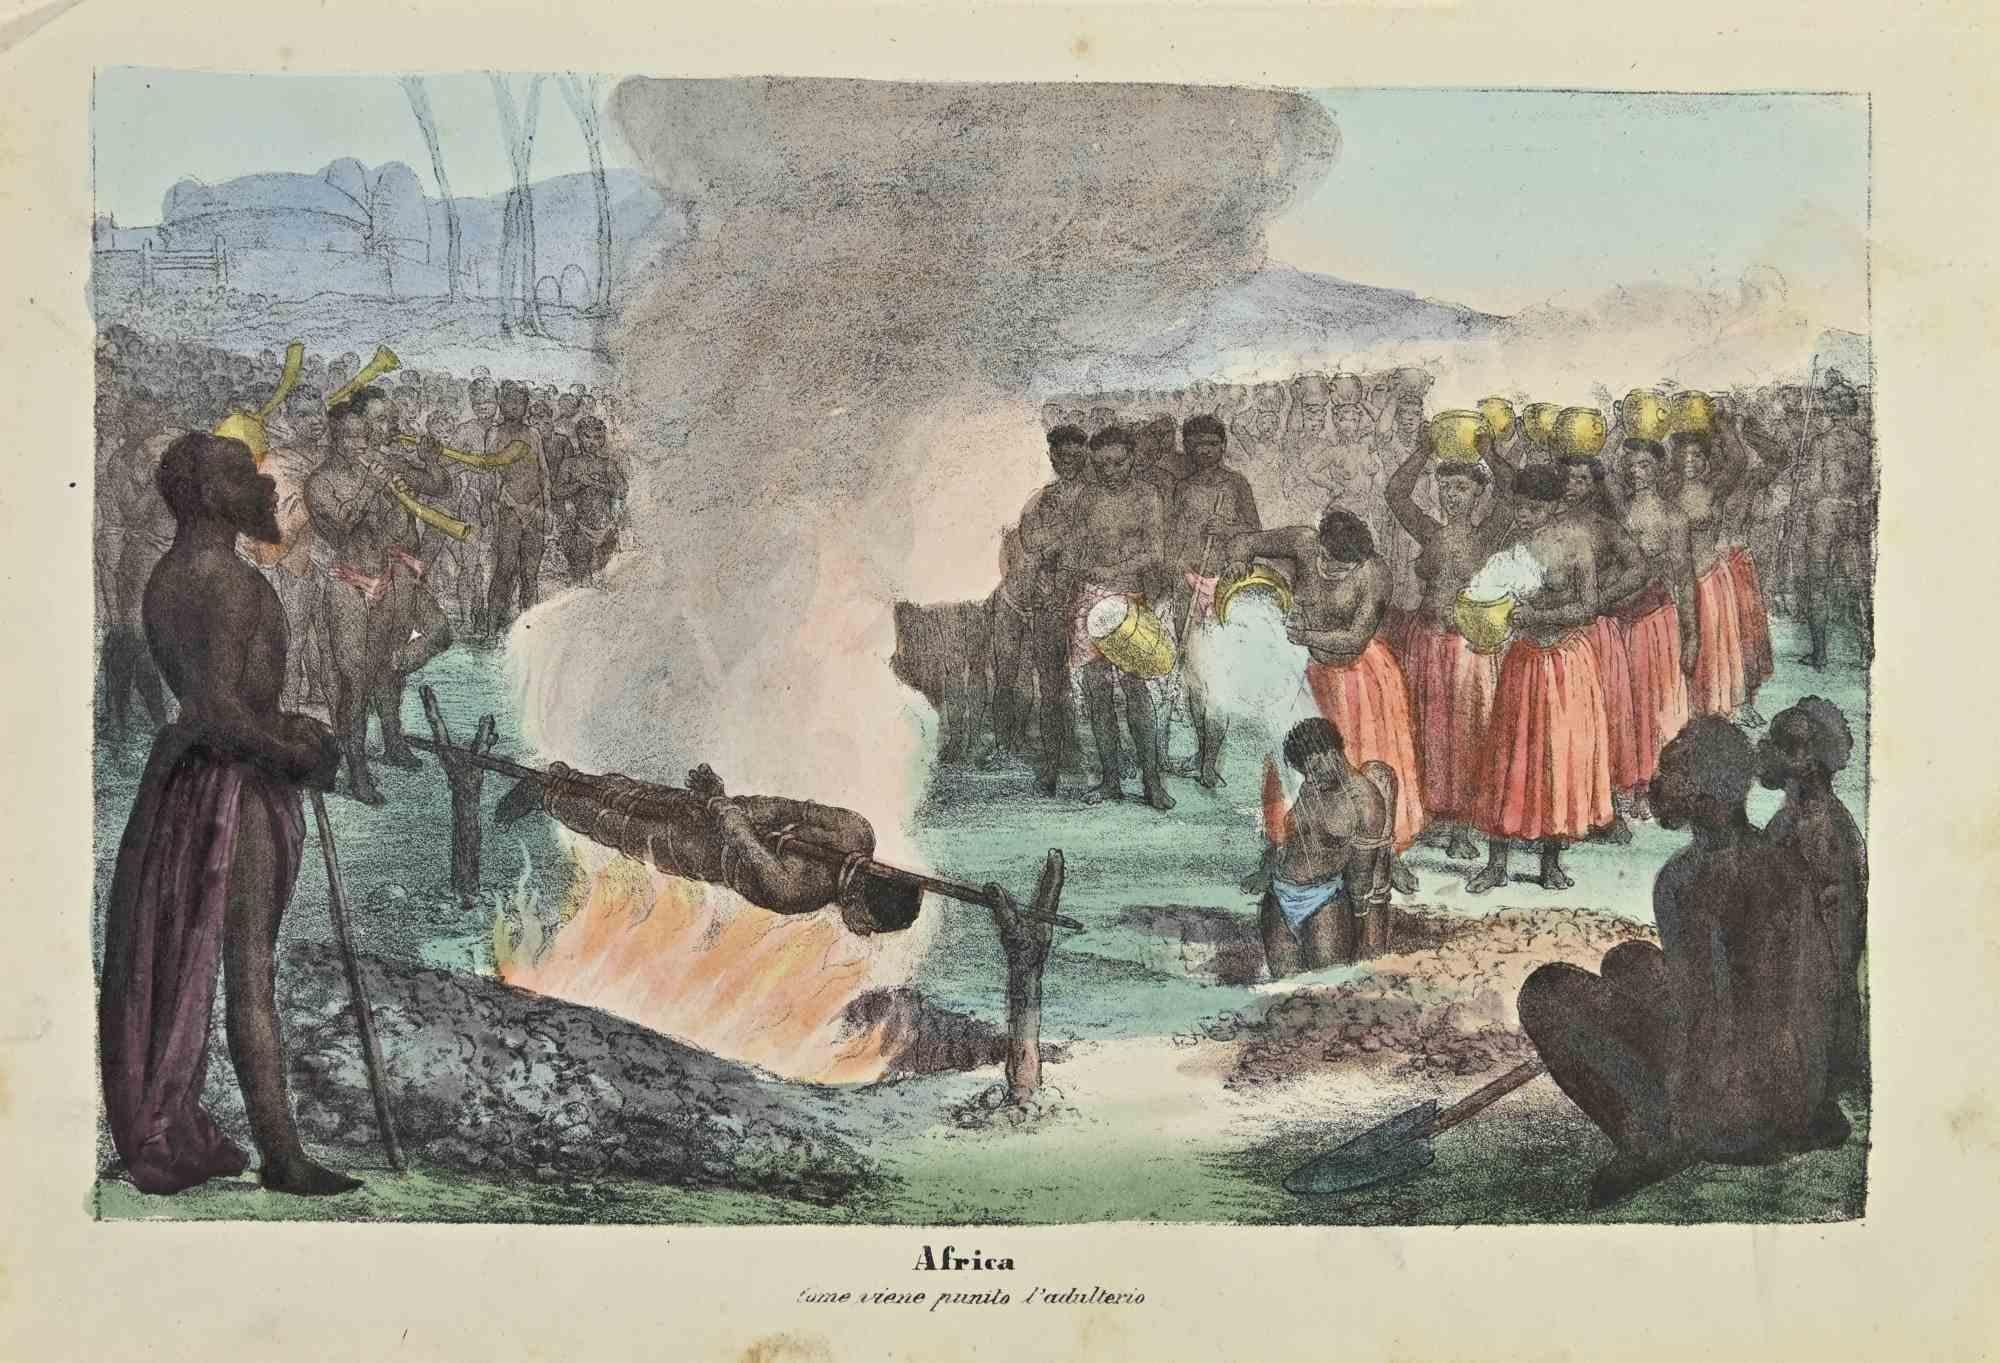 Ancient African Customs is a lithograph made by Auguste Wahlen in 1844.

Hand colored.

Good condition.

At the center of the artwork is the original title "Africa" and subtitle "Come viene punito l'adulterio" (translated, "How is adultery